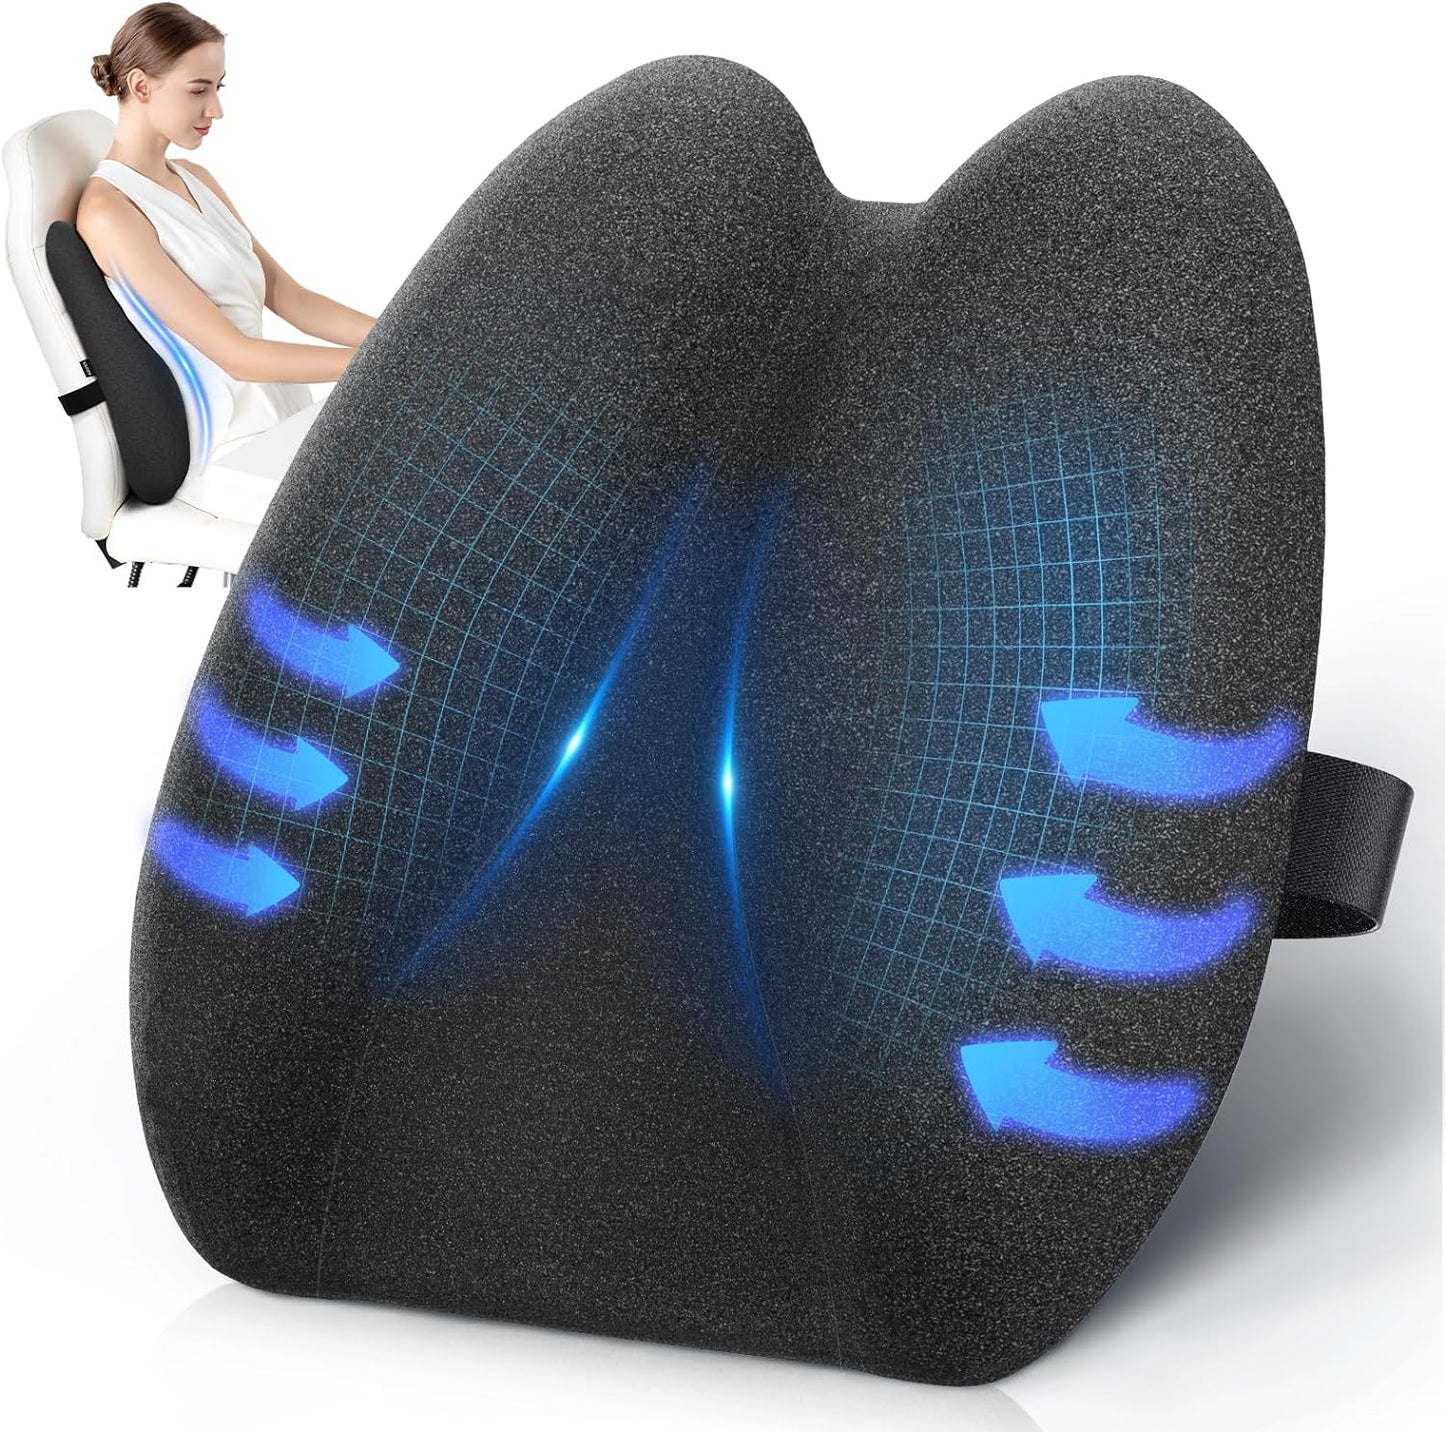 New Pain Relief Lumbar Support Pillow for Office Chair, Ergonomic Lumbar Pillow for 5X Back Support and Improved Posture Effectively, Cooling Memory Foam Back Cushion copy